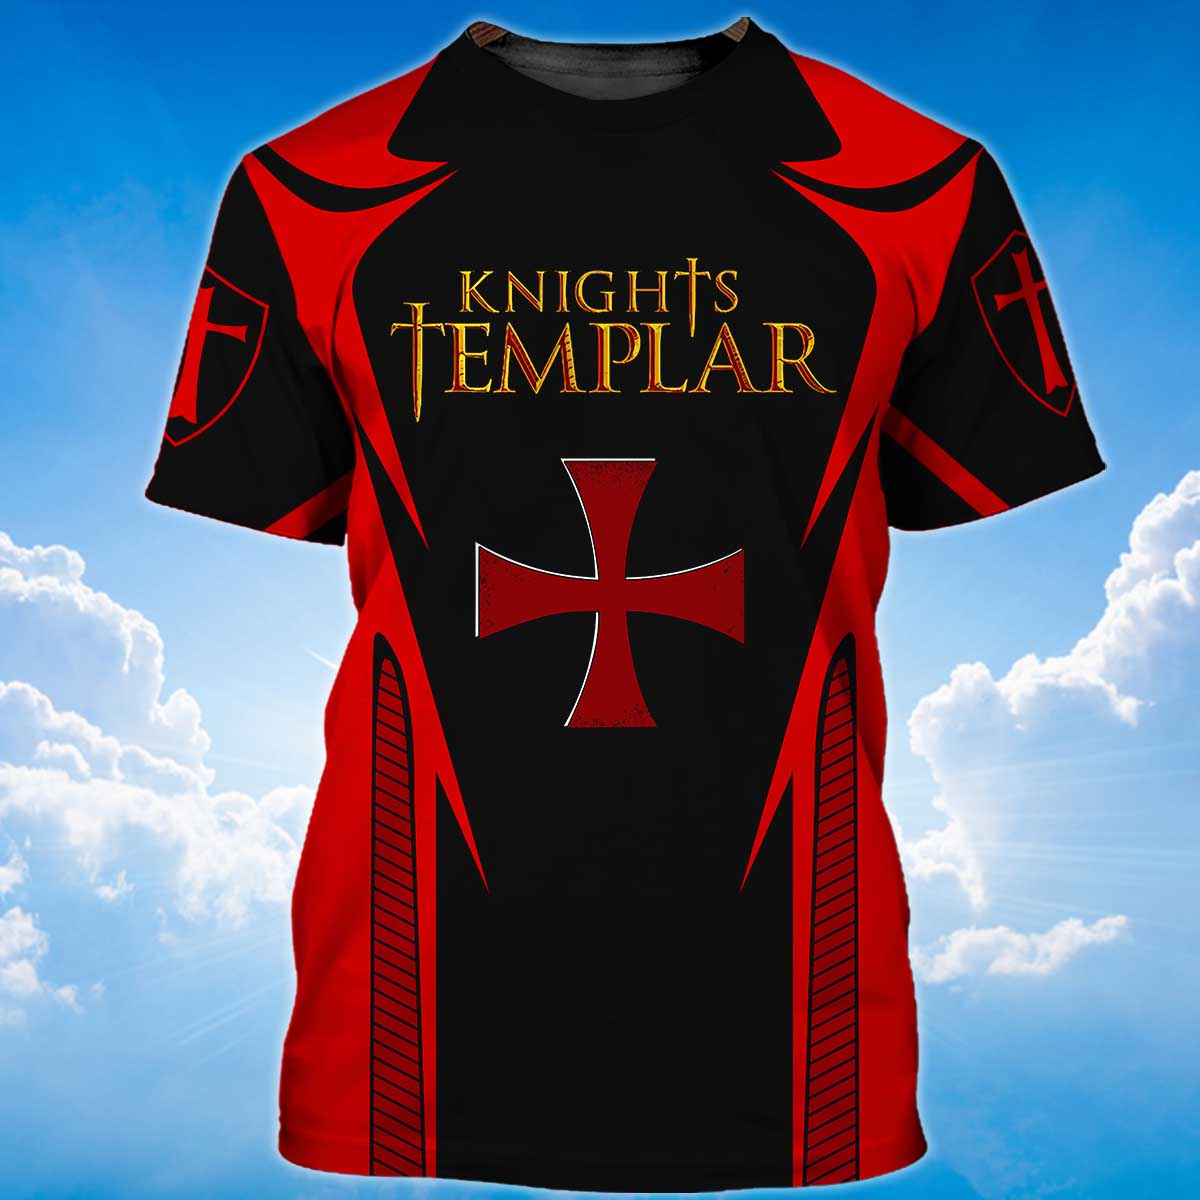 Knight Templar Jesus Christ Is The Only Way To Heaven T-Shirt